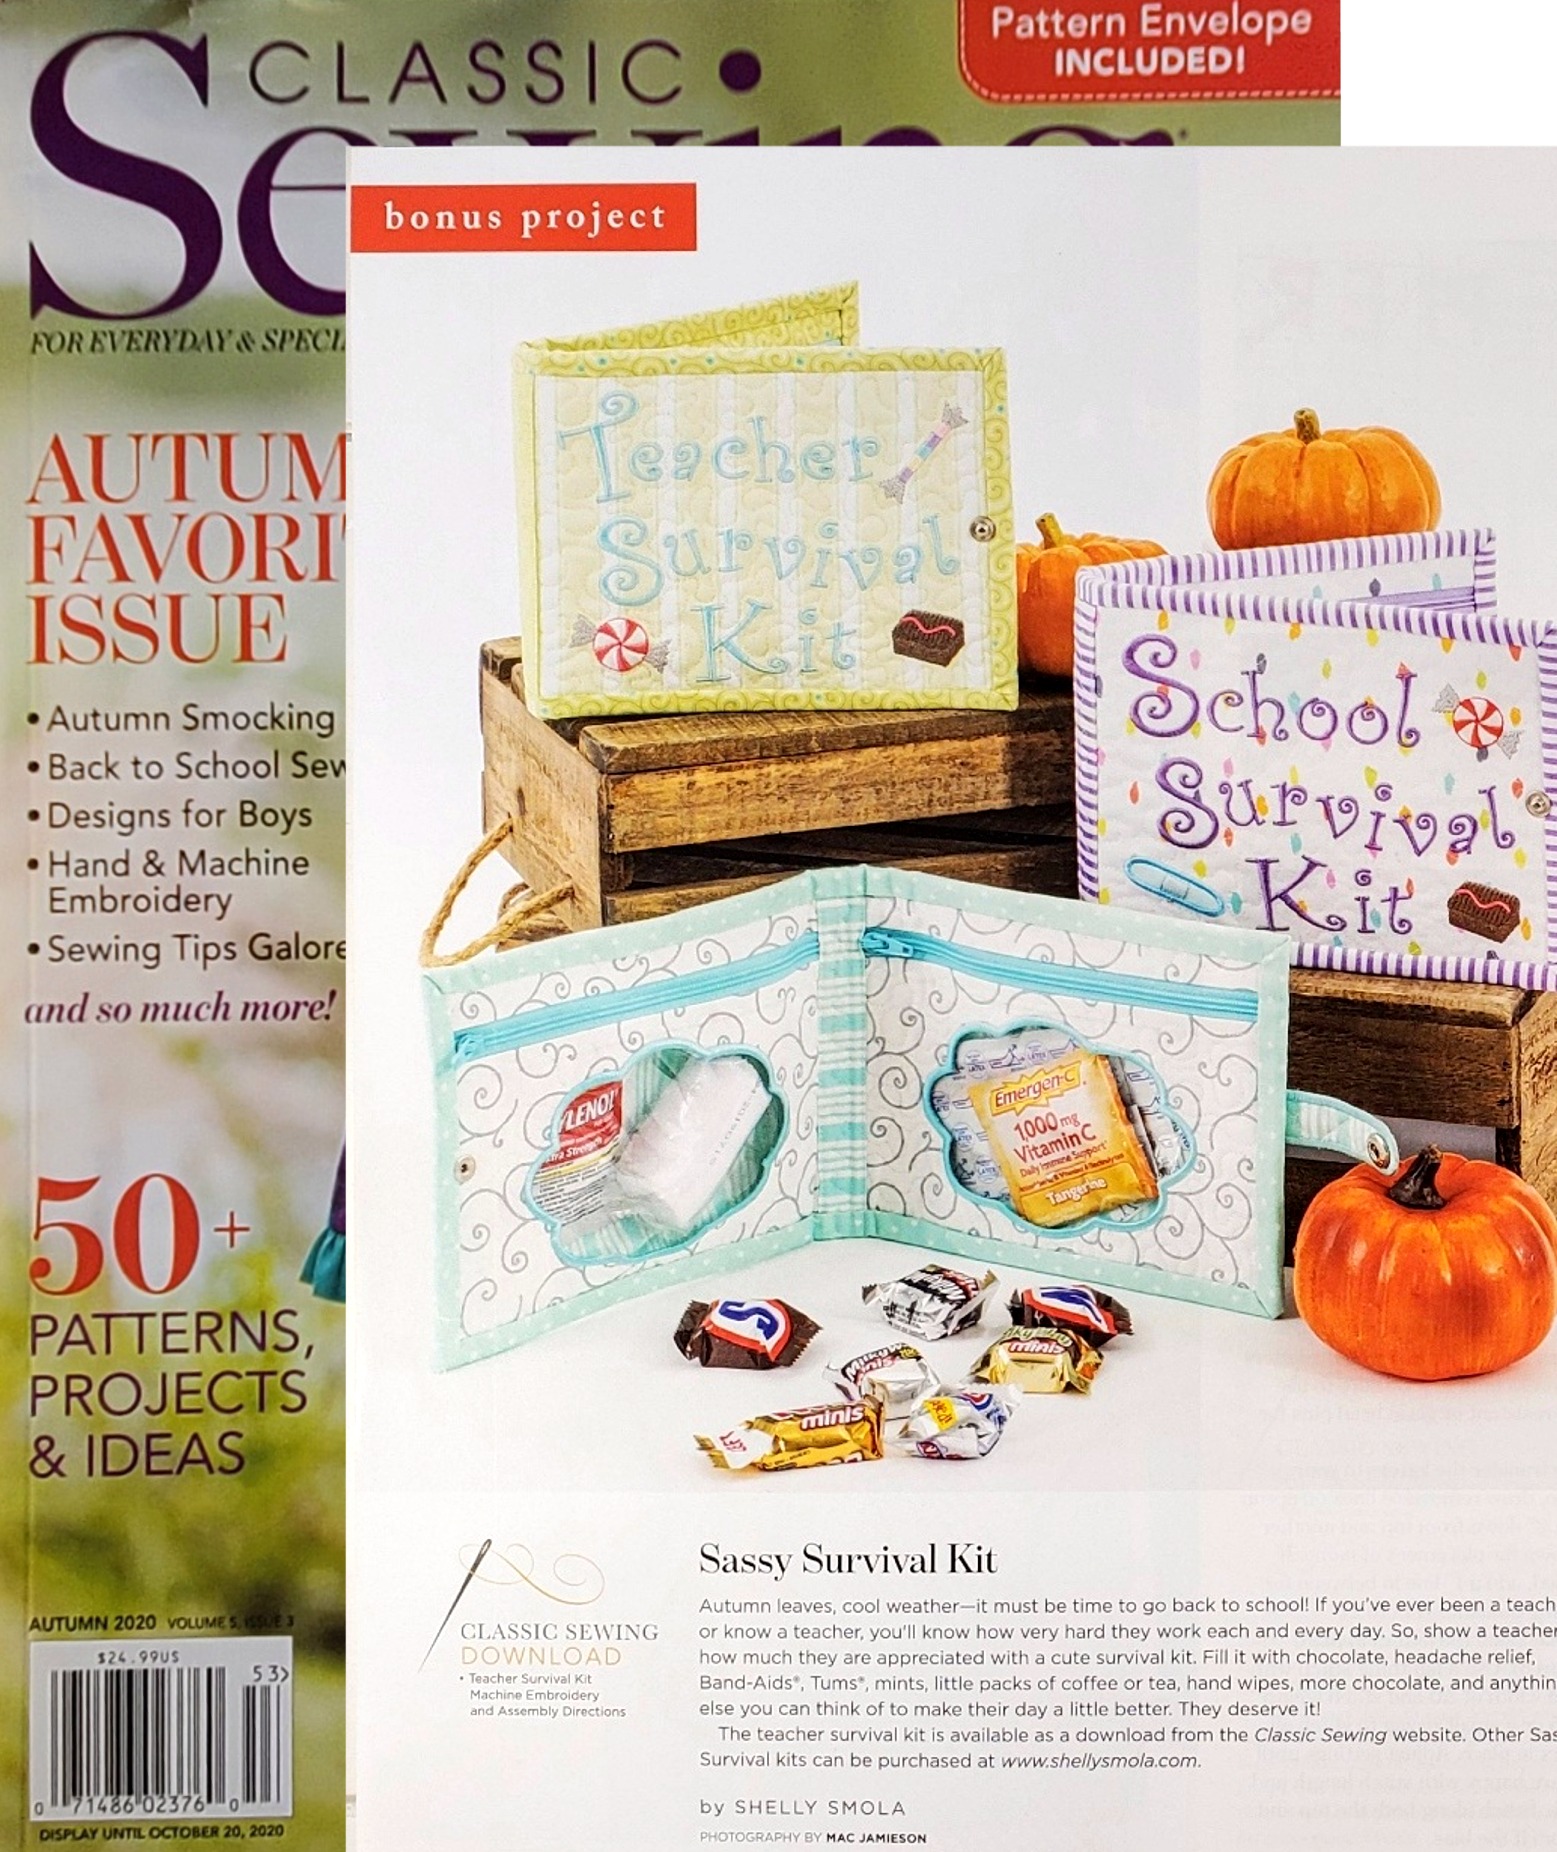 Sassy Survival Kits featured in Classic Sewing